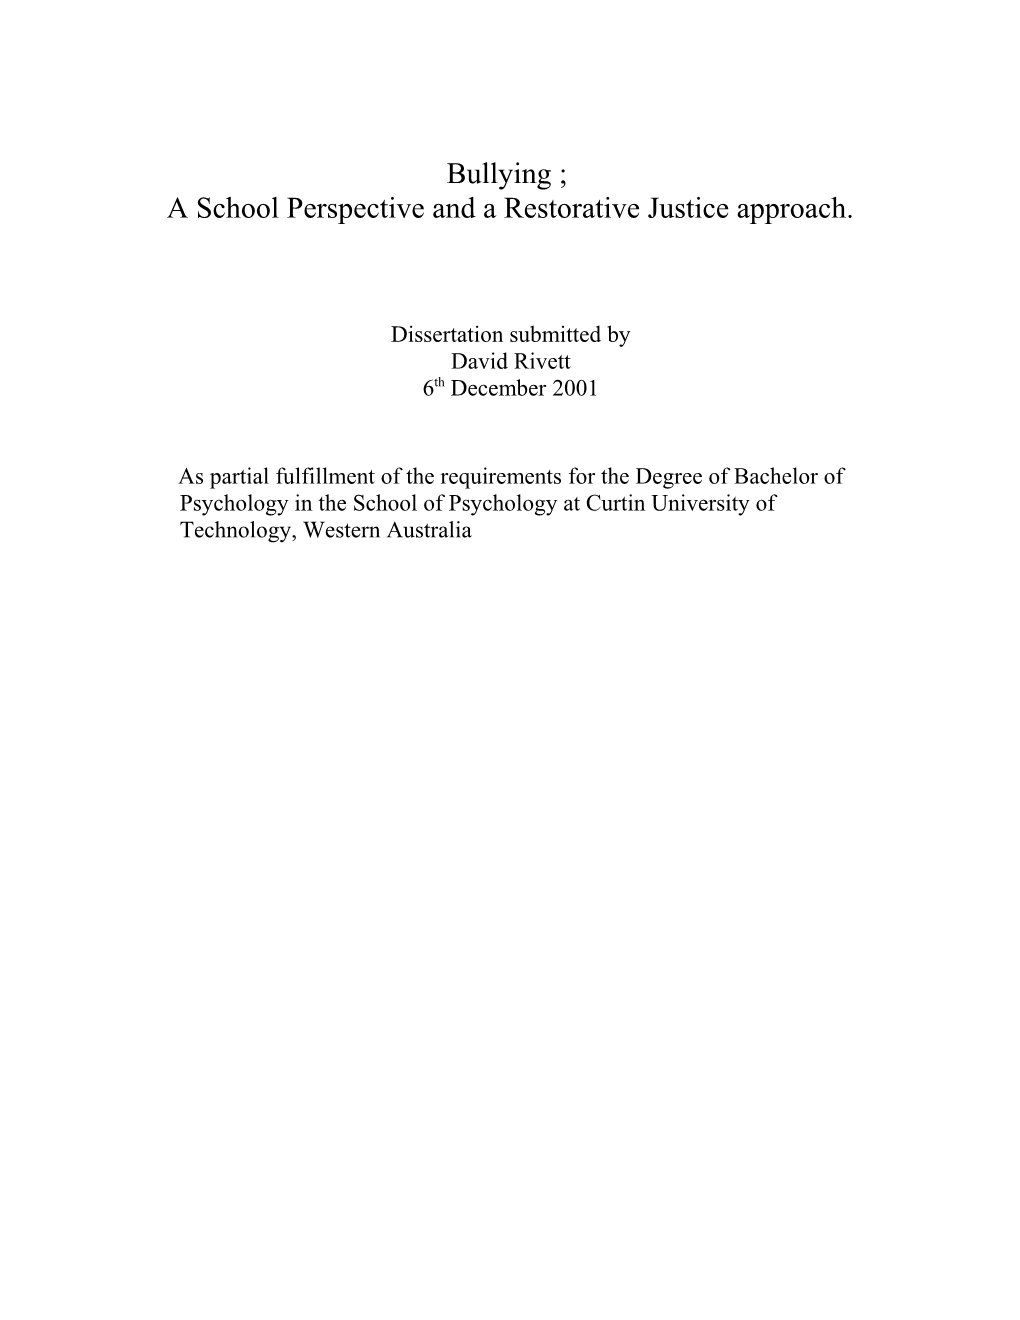 A School Perspective and a Restorative Justice Approach